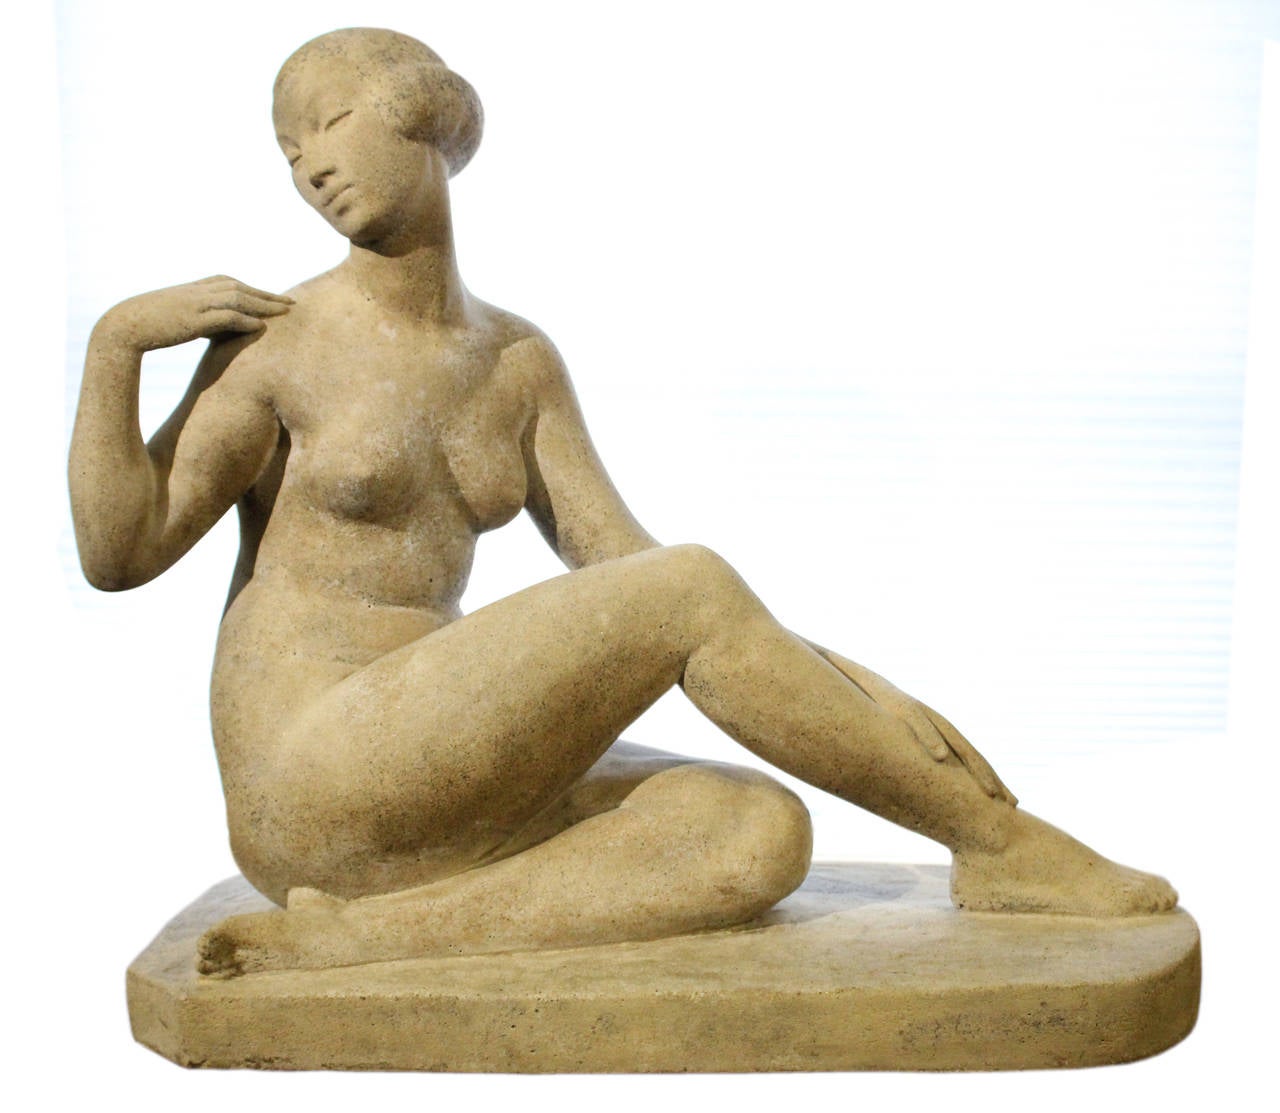 A timeless cast Limestone Sculpture of remarkable beauty and emotional finesse -signature- Marcel Bouraine.
Marcel Bouraine was one of France's preeminent, most prolific sculptors during the Art Deco period. The Limestone 'Awakening' after Marcel